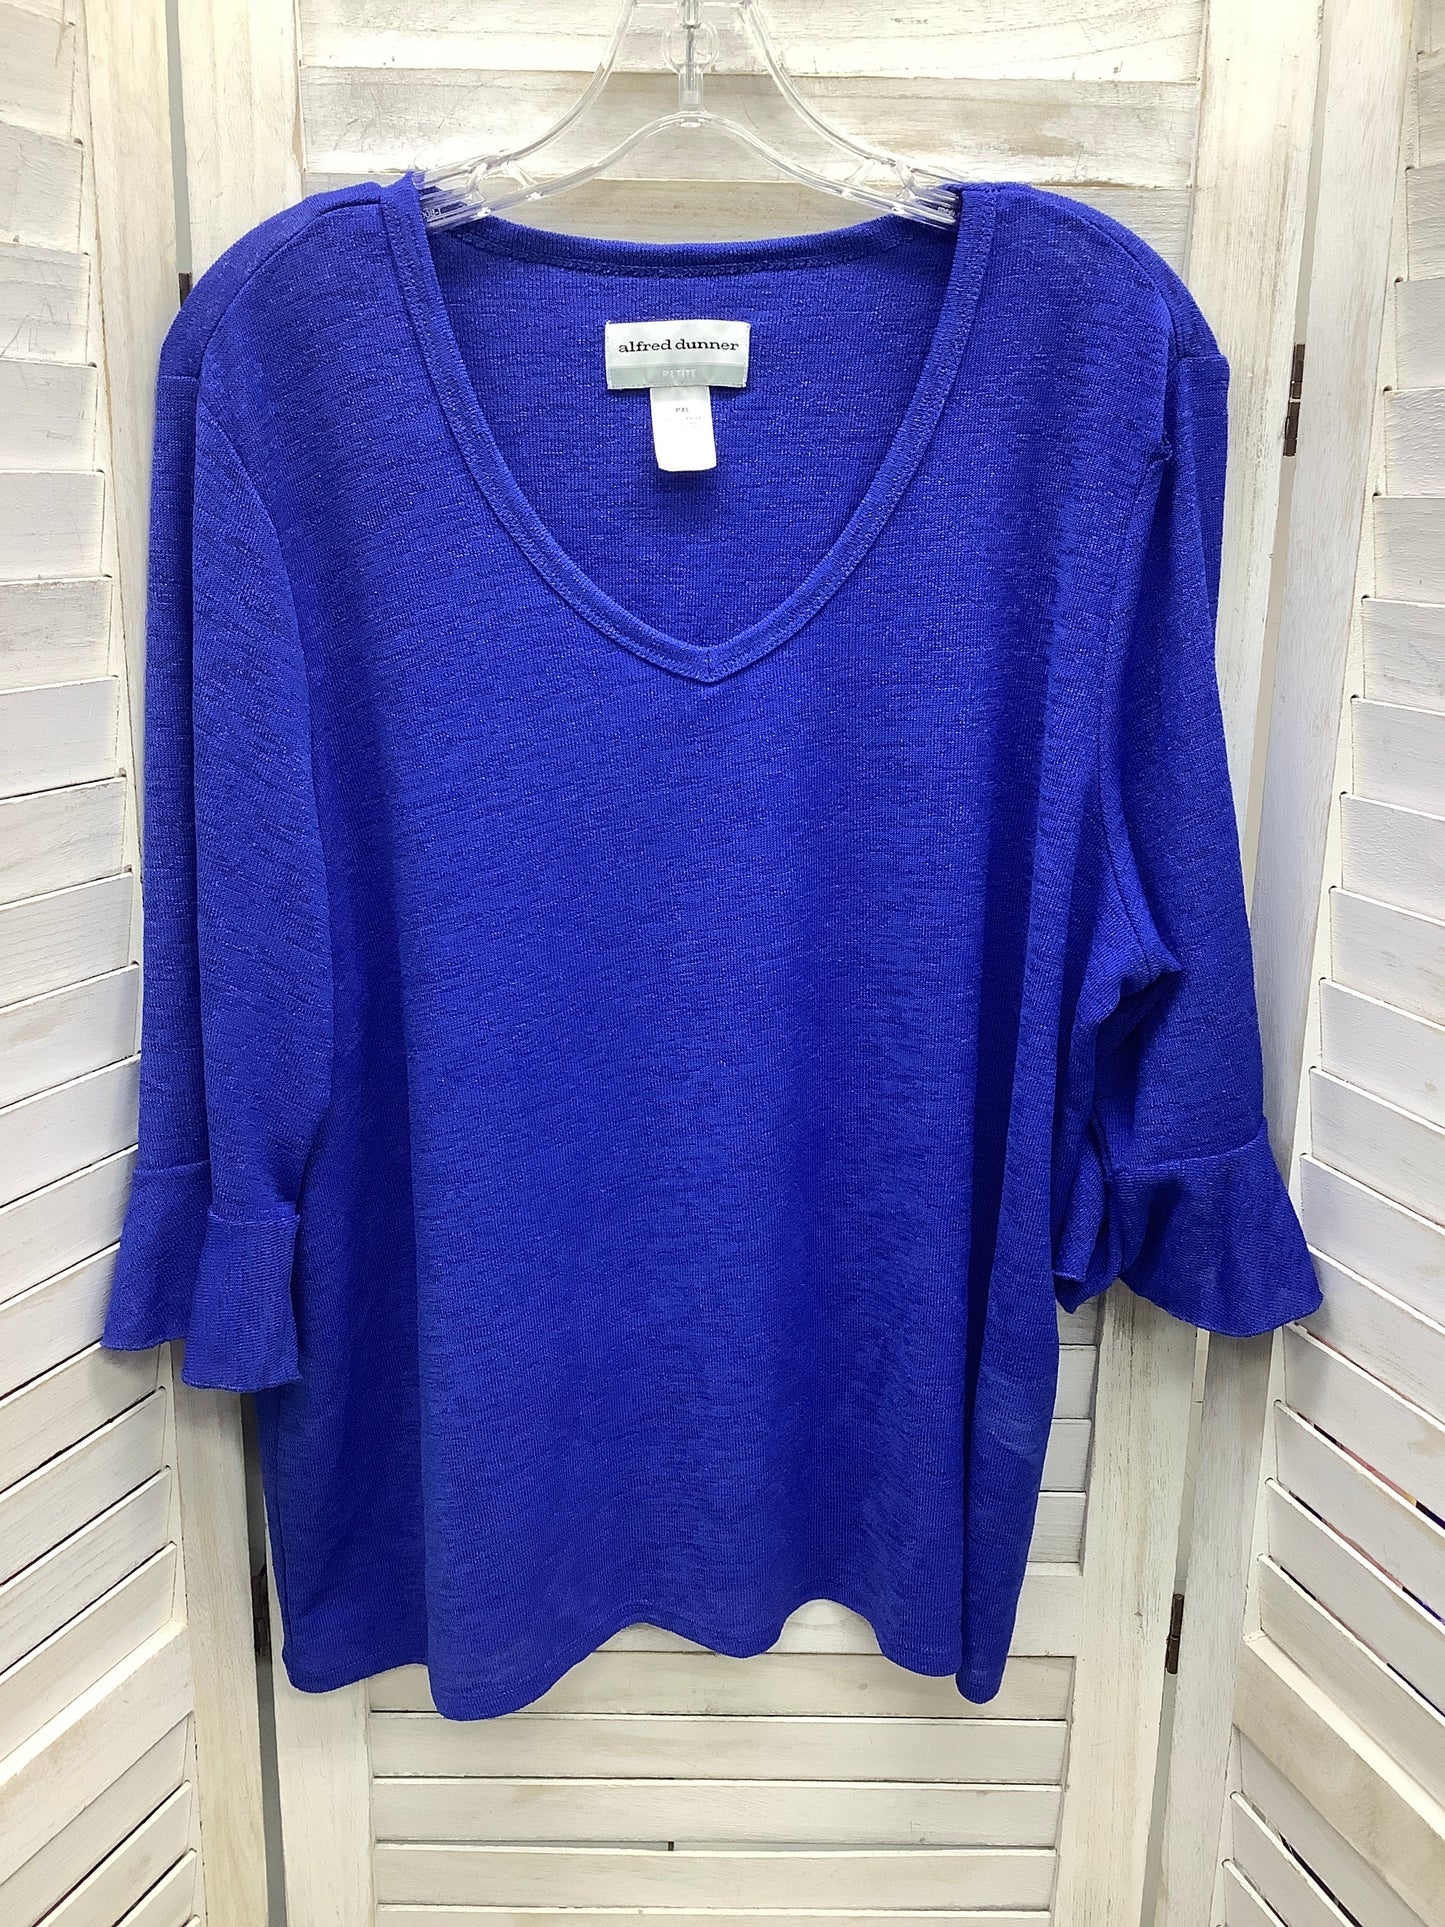 Blue Top 3/4 Sleeve Basic Alfred Dunner, Size Xl